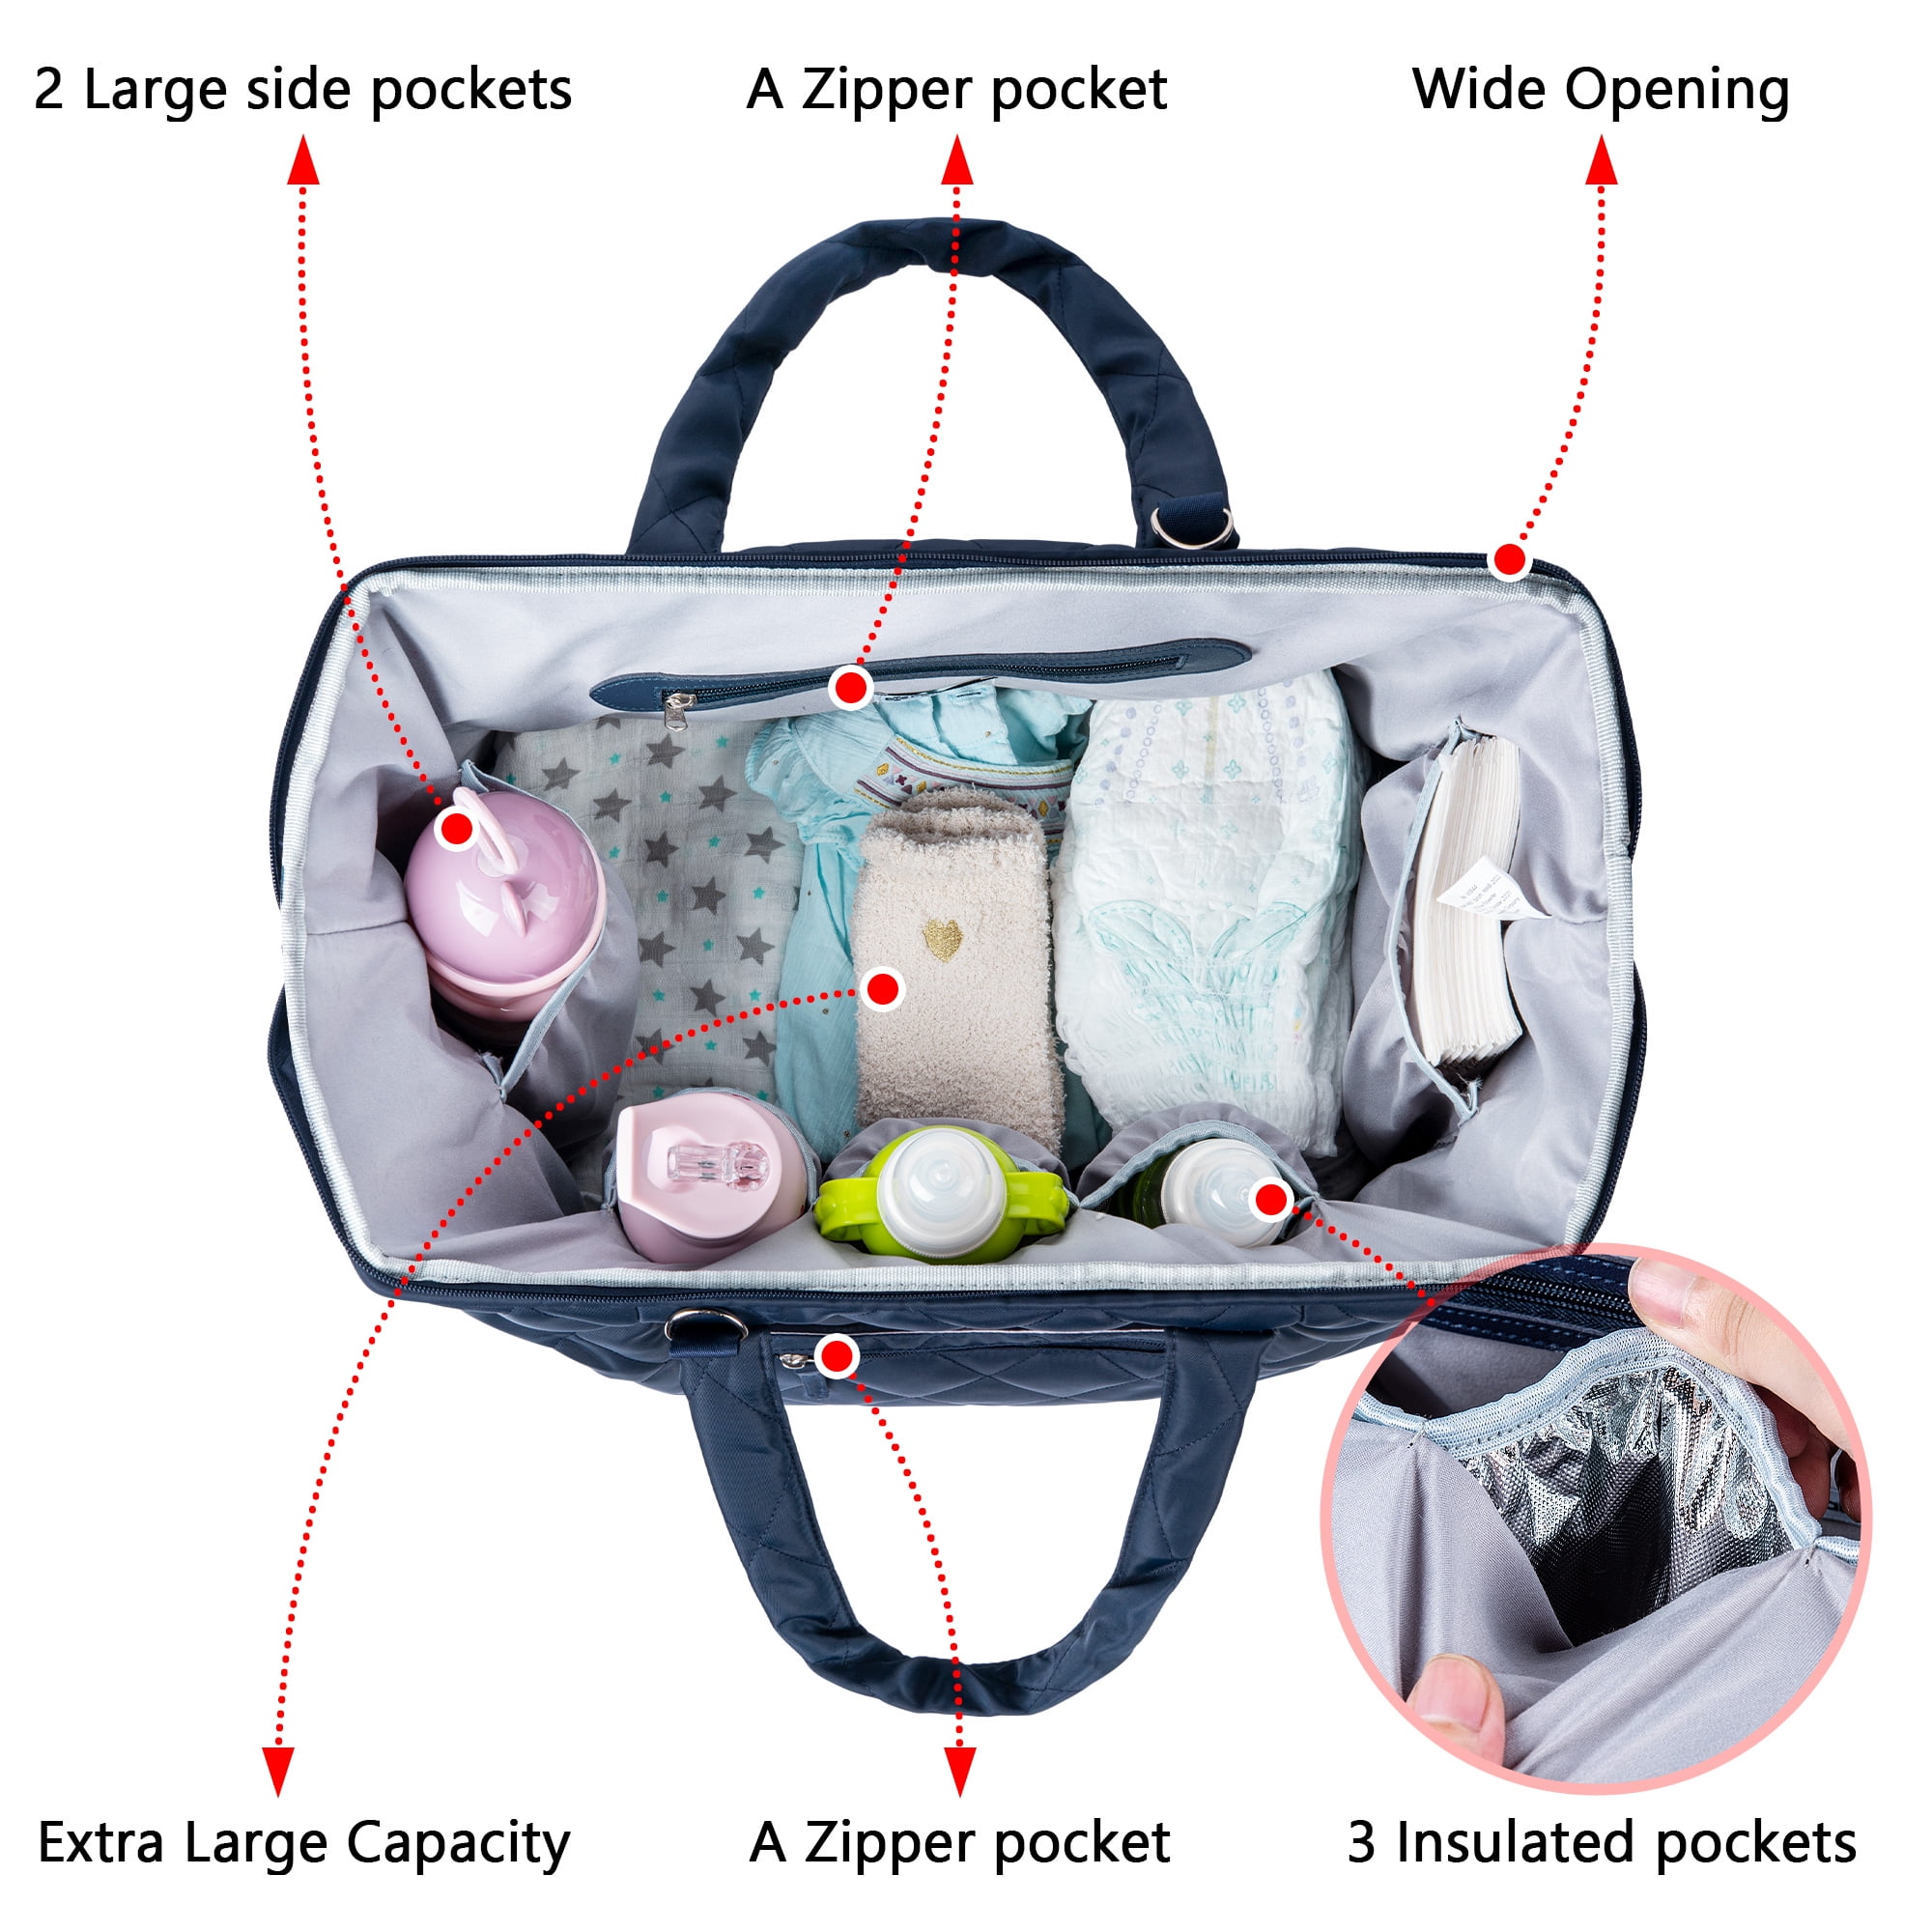 Maternity Hospital Bag: What To Pack For The Baby And Yourself